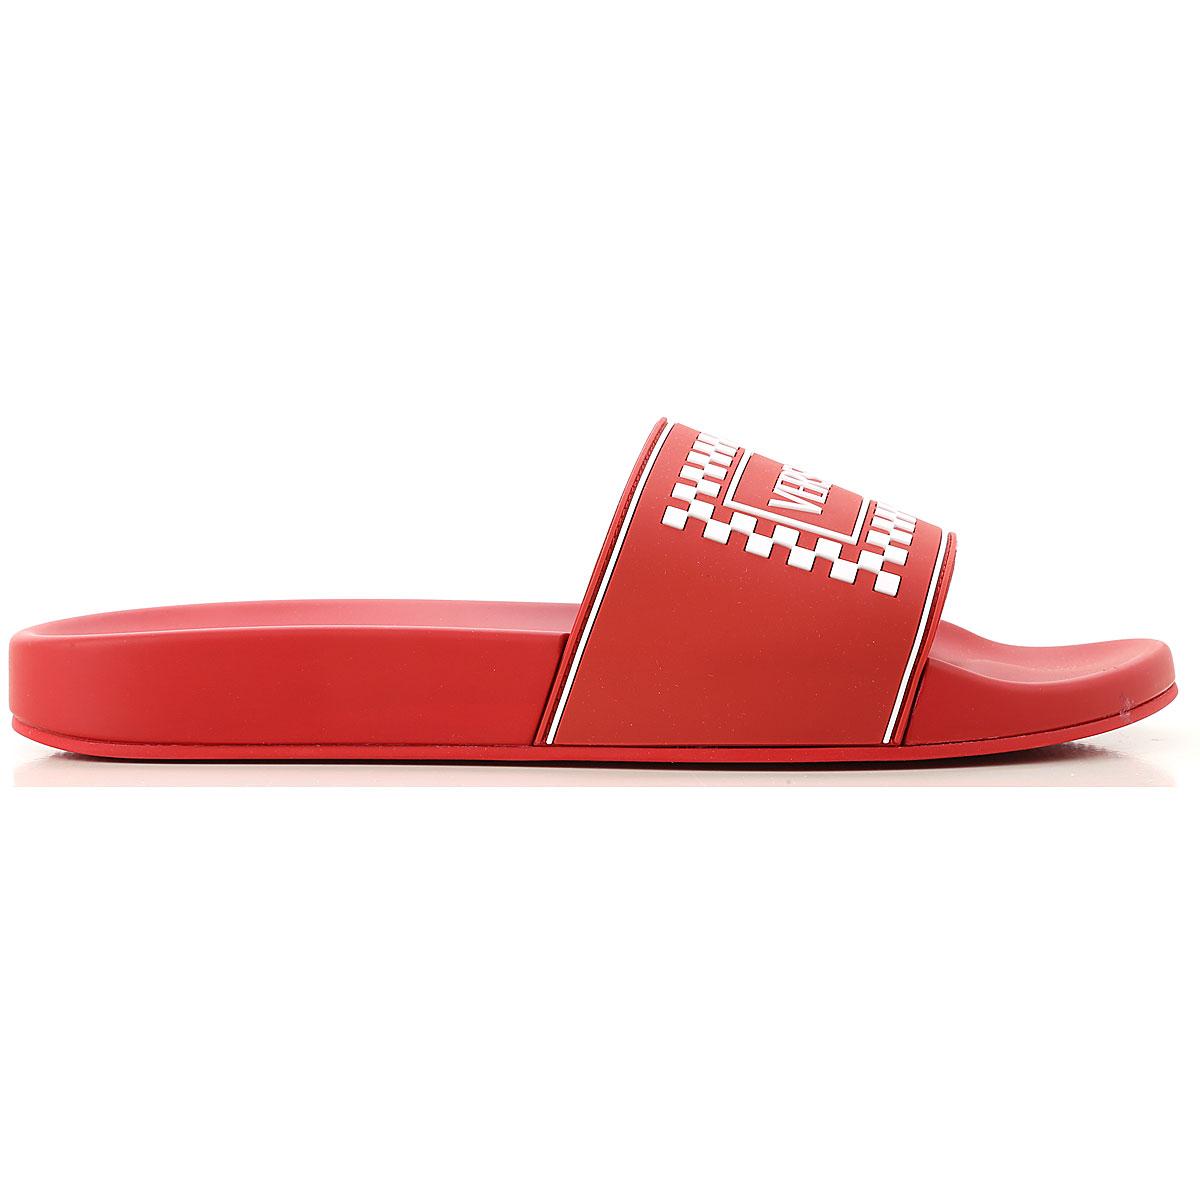 Versace Rubber Ciabatta Pool Slides in Red White (Red) for Men - Lyst